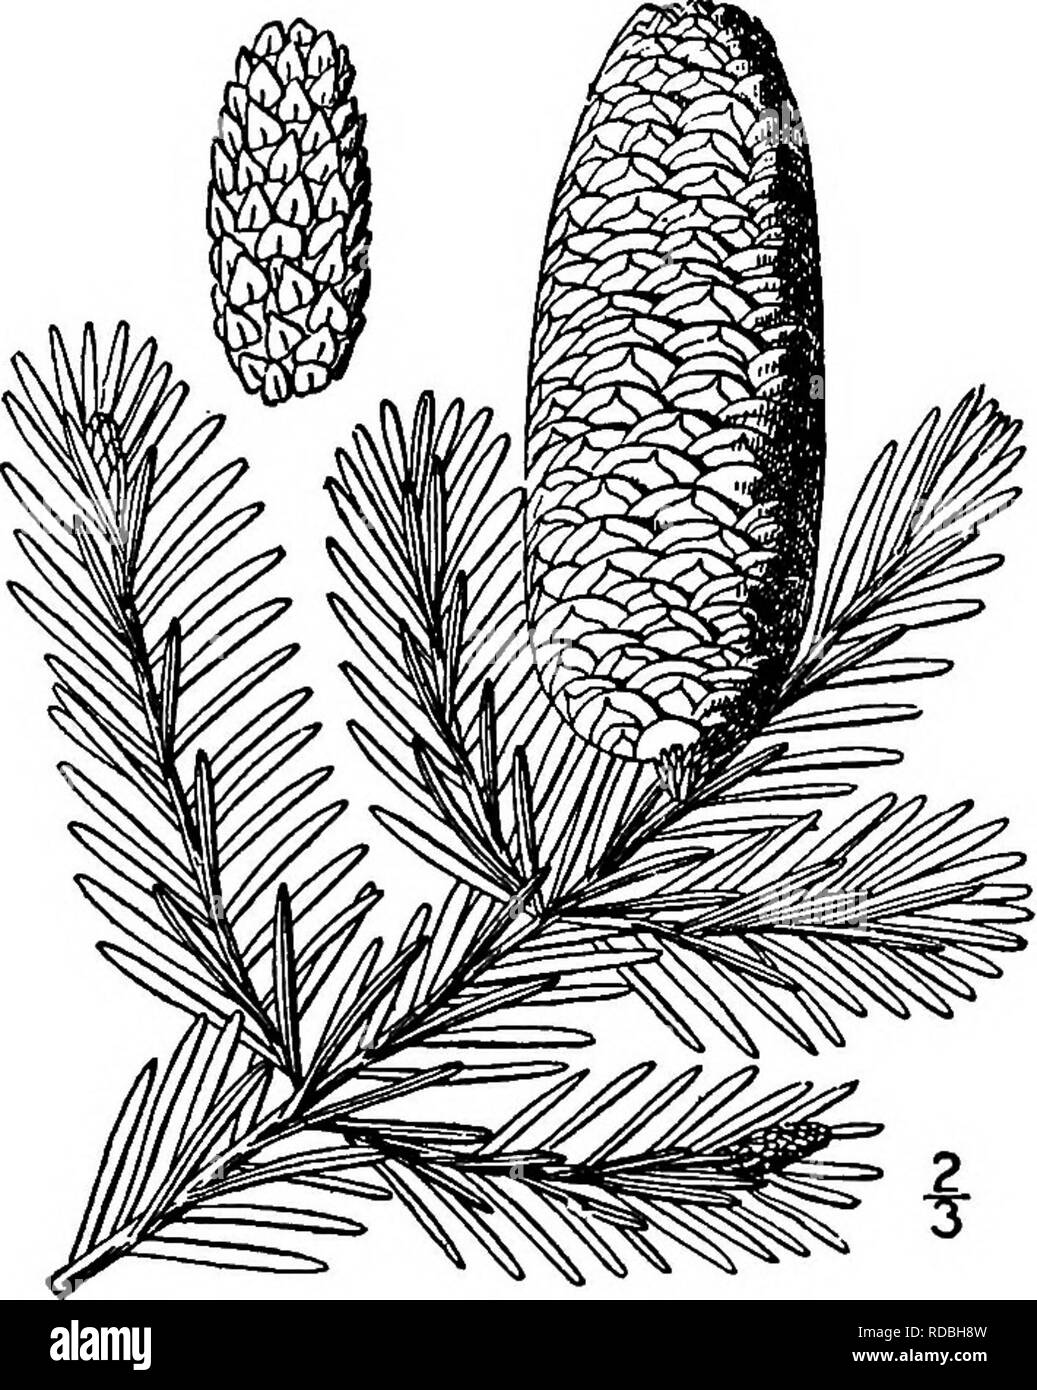 . North American trees : being descriptions and illustrations of the trees growing independently of cultivation in North America, north of Mexico and the West Indies . Trees. Balsam Fir 75 I. BALSAM FIR—Abies baJsamea (Linnaeus) Miller Pintis halsamea Linnaeus The Balsam fir, also called Balm of Gilead fir, Balsam, Blister pine, Fir pine, Silver pine. Fir tree. Single spruce, Sapin, and &quot;Cho-koh-tung,&quot; meaning &quot;blisters,&quot; by the Indians, occurs from Labrador, west to Alberta and southward to the moun- tains of Virginia and to Minnesota, being most abundant in the regions ab Stock Photo